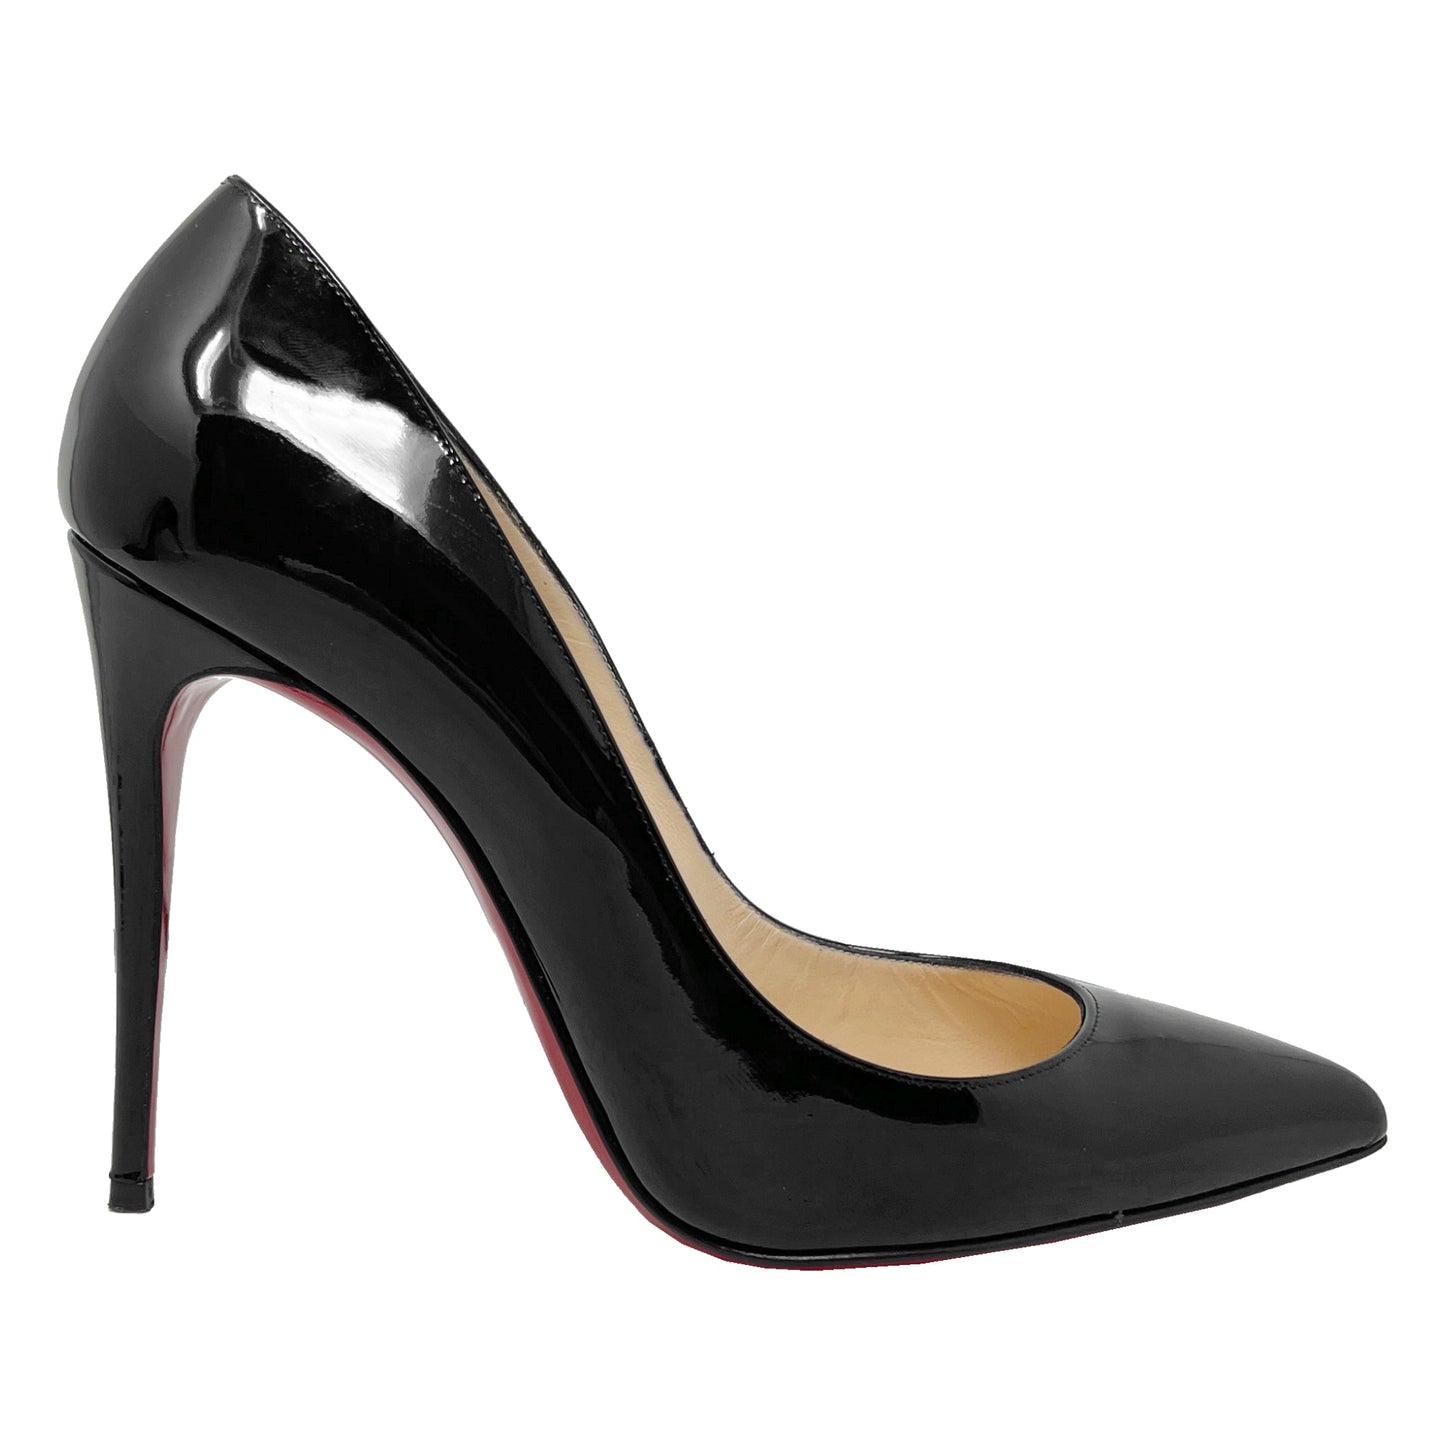 Christian Louboutin Pigalle Follies Black Patent Leather Pointed Toe Pumps Heels